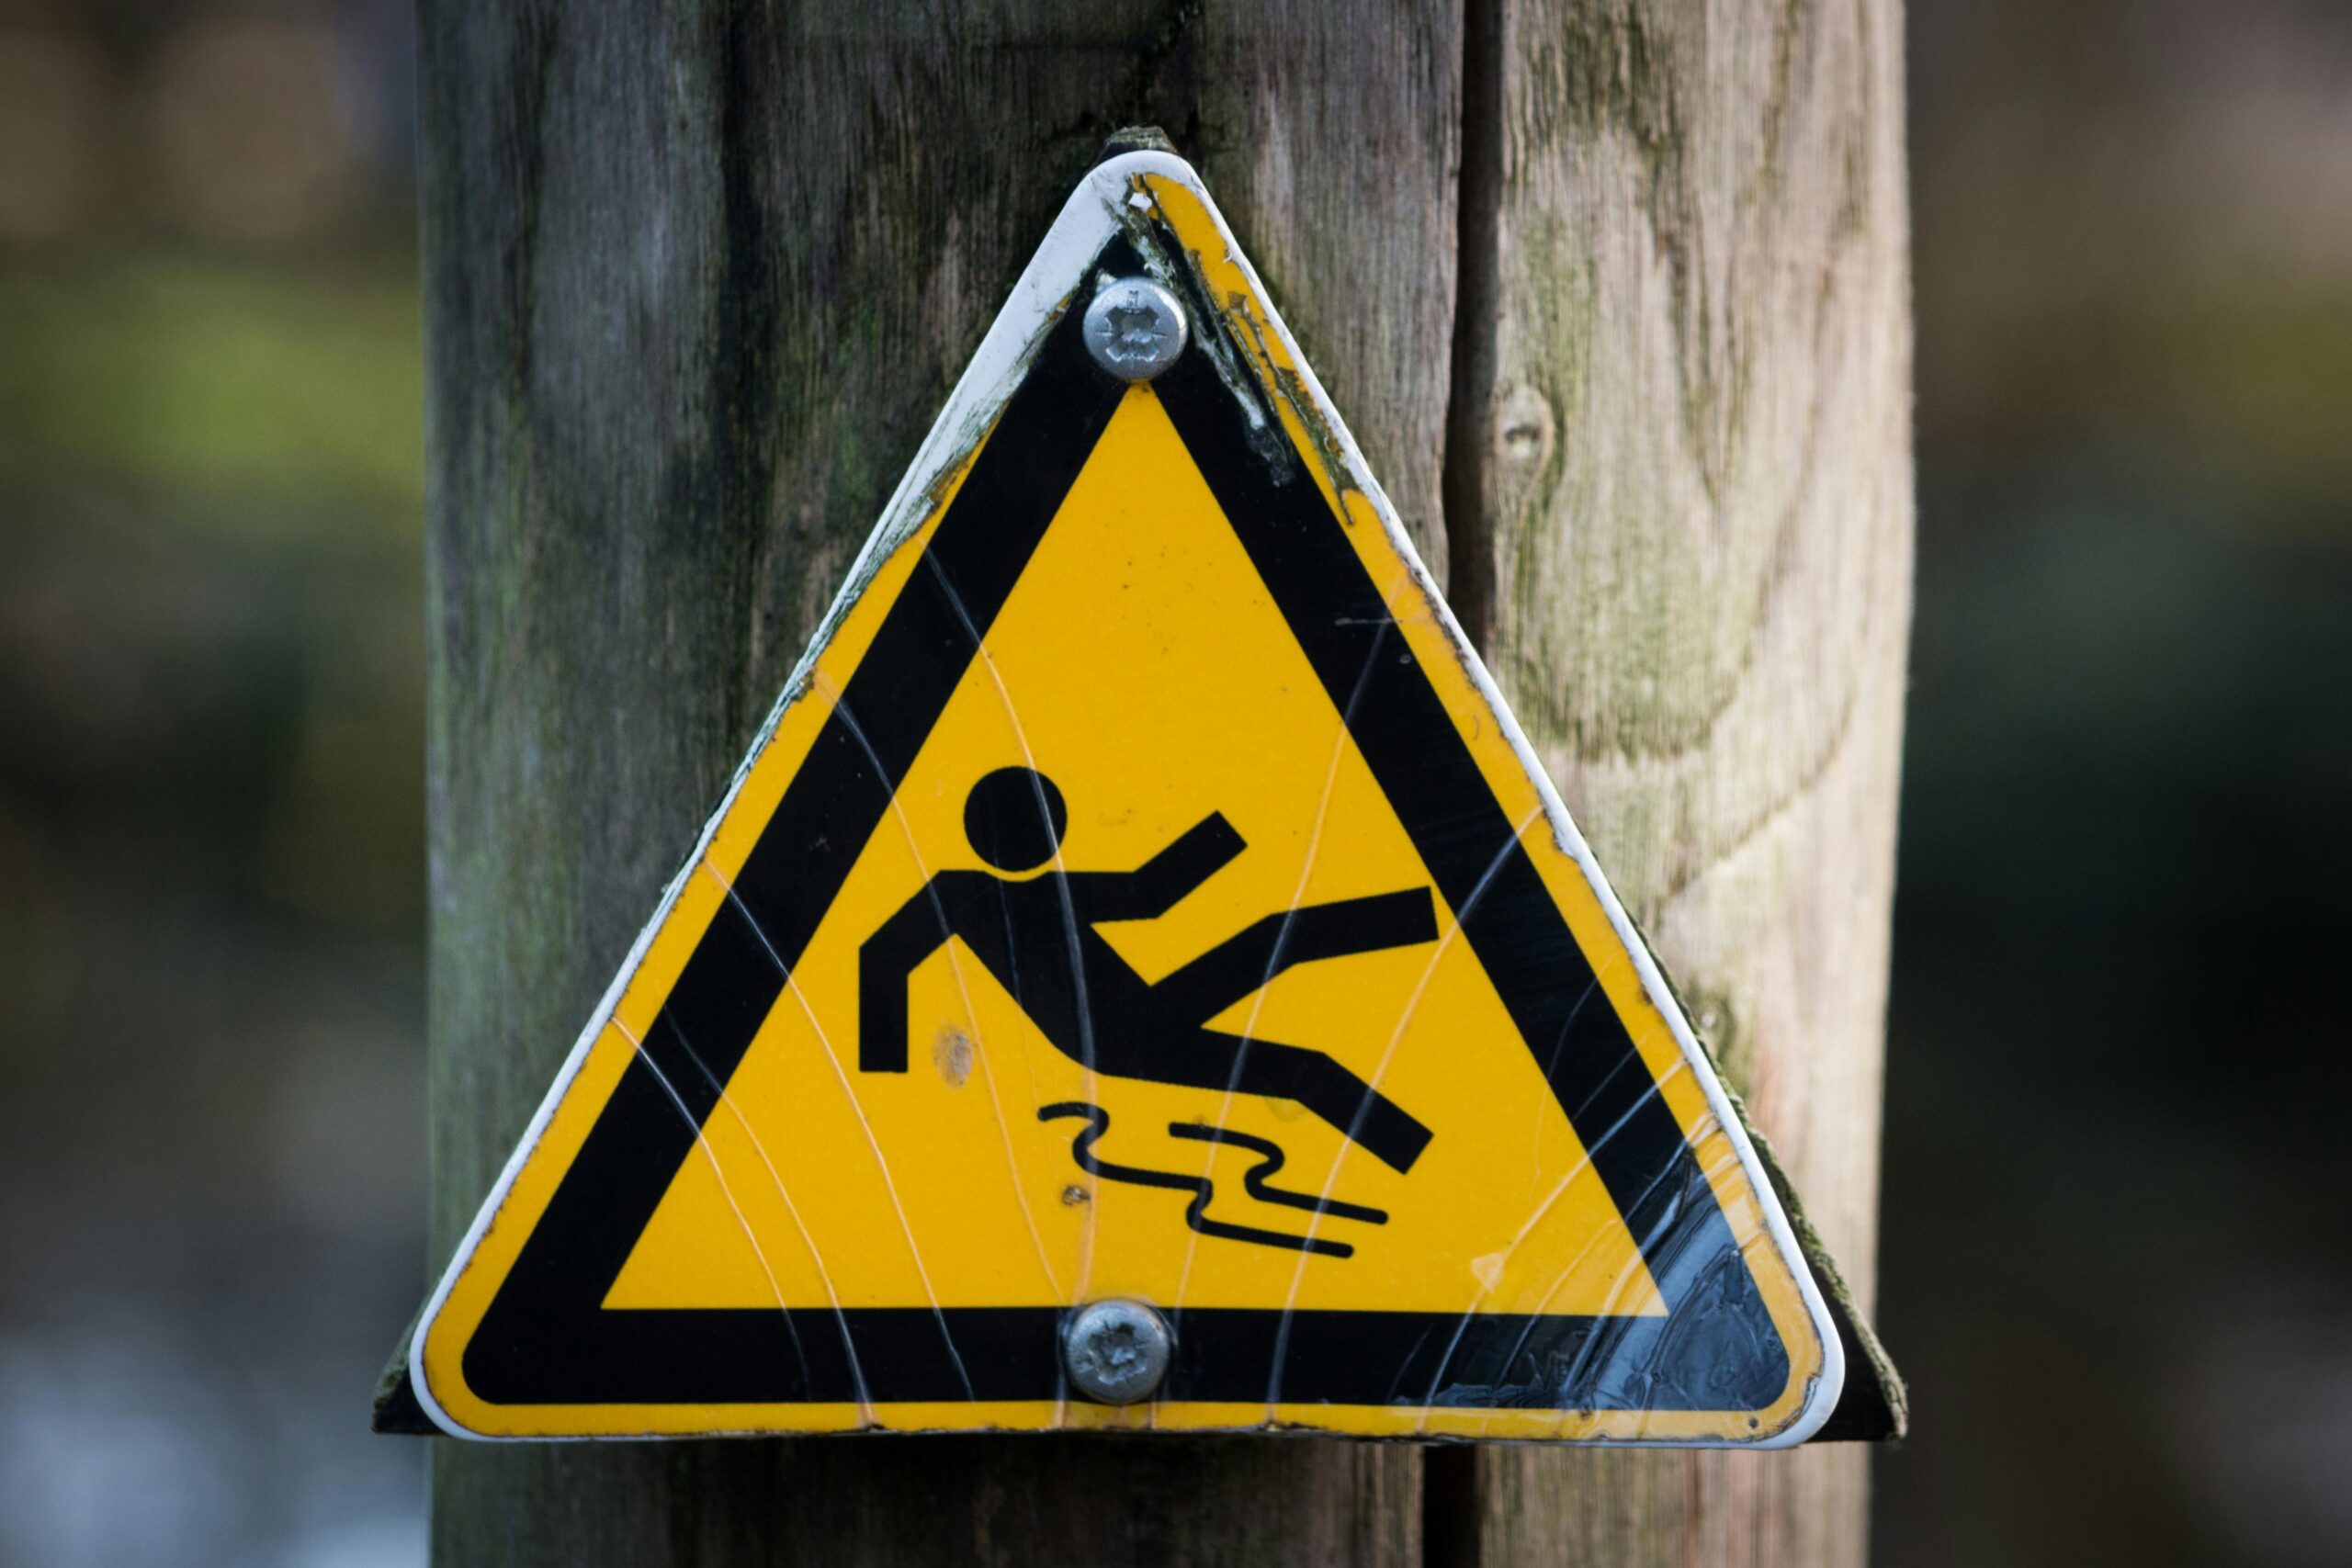 Image of slip and fall sign.